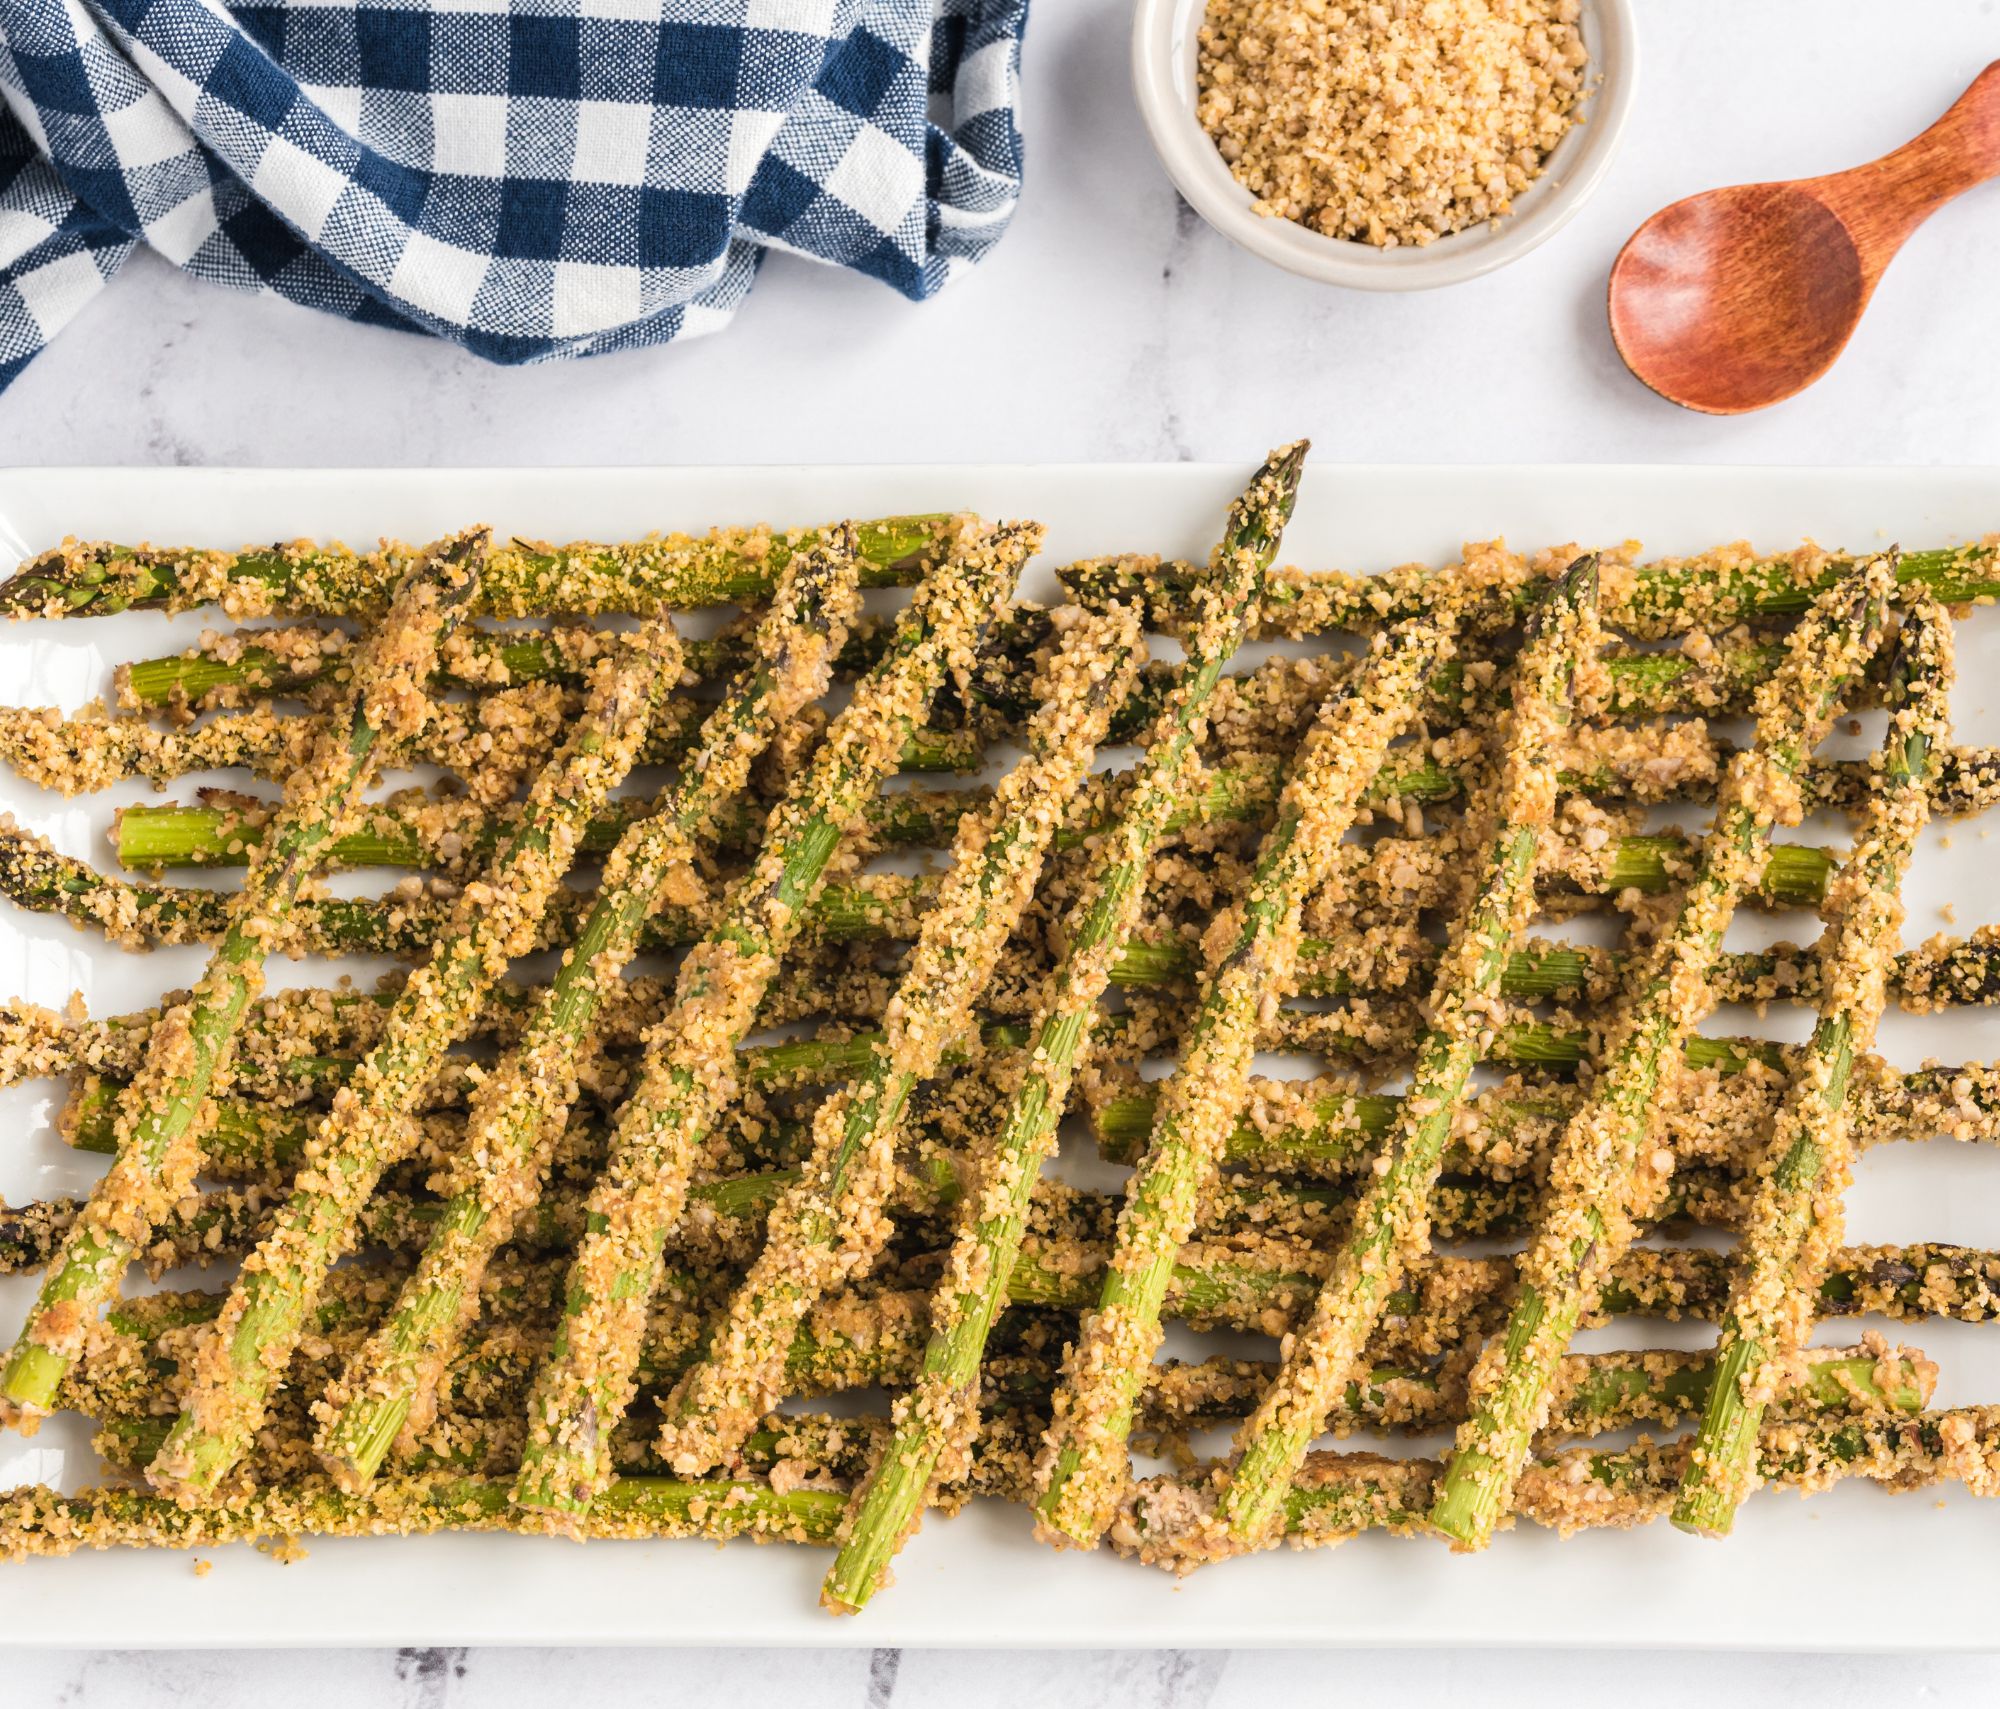 Parmesan Crusted Asparagus on a white tabletop